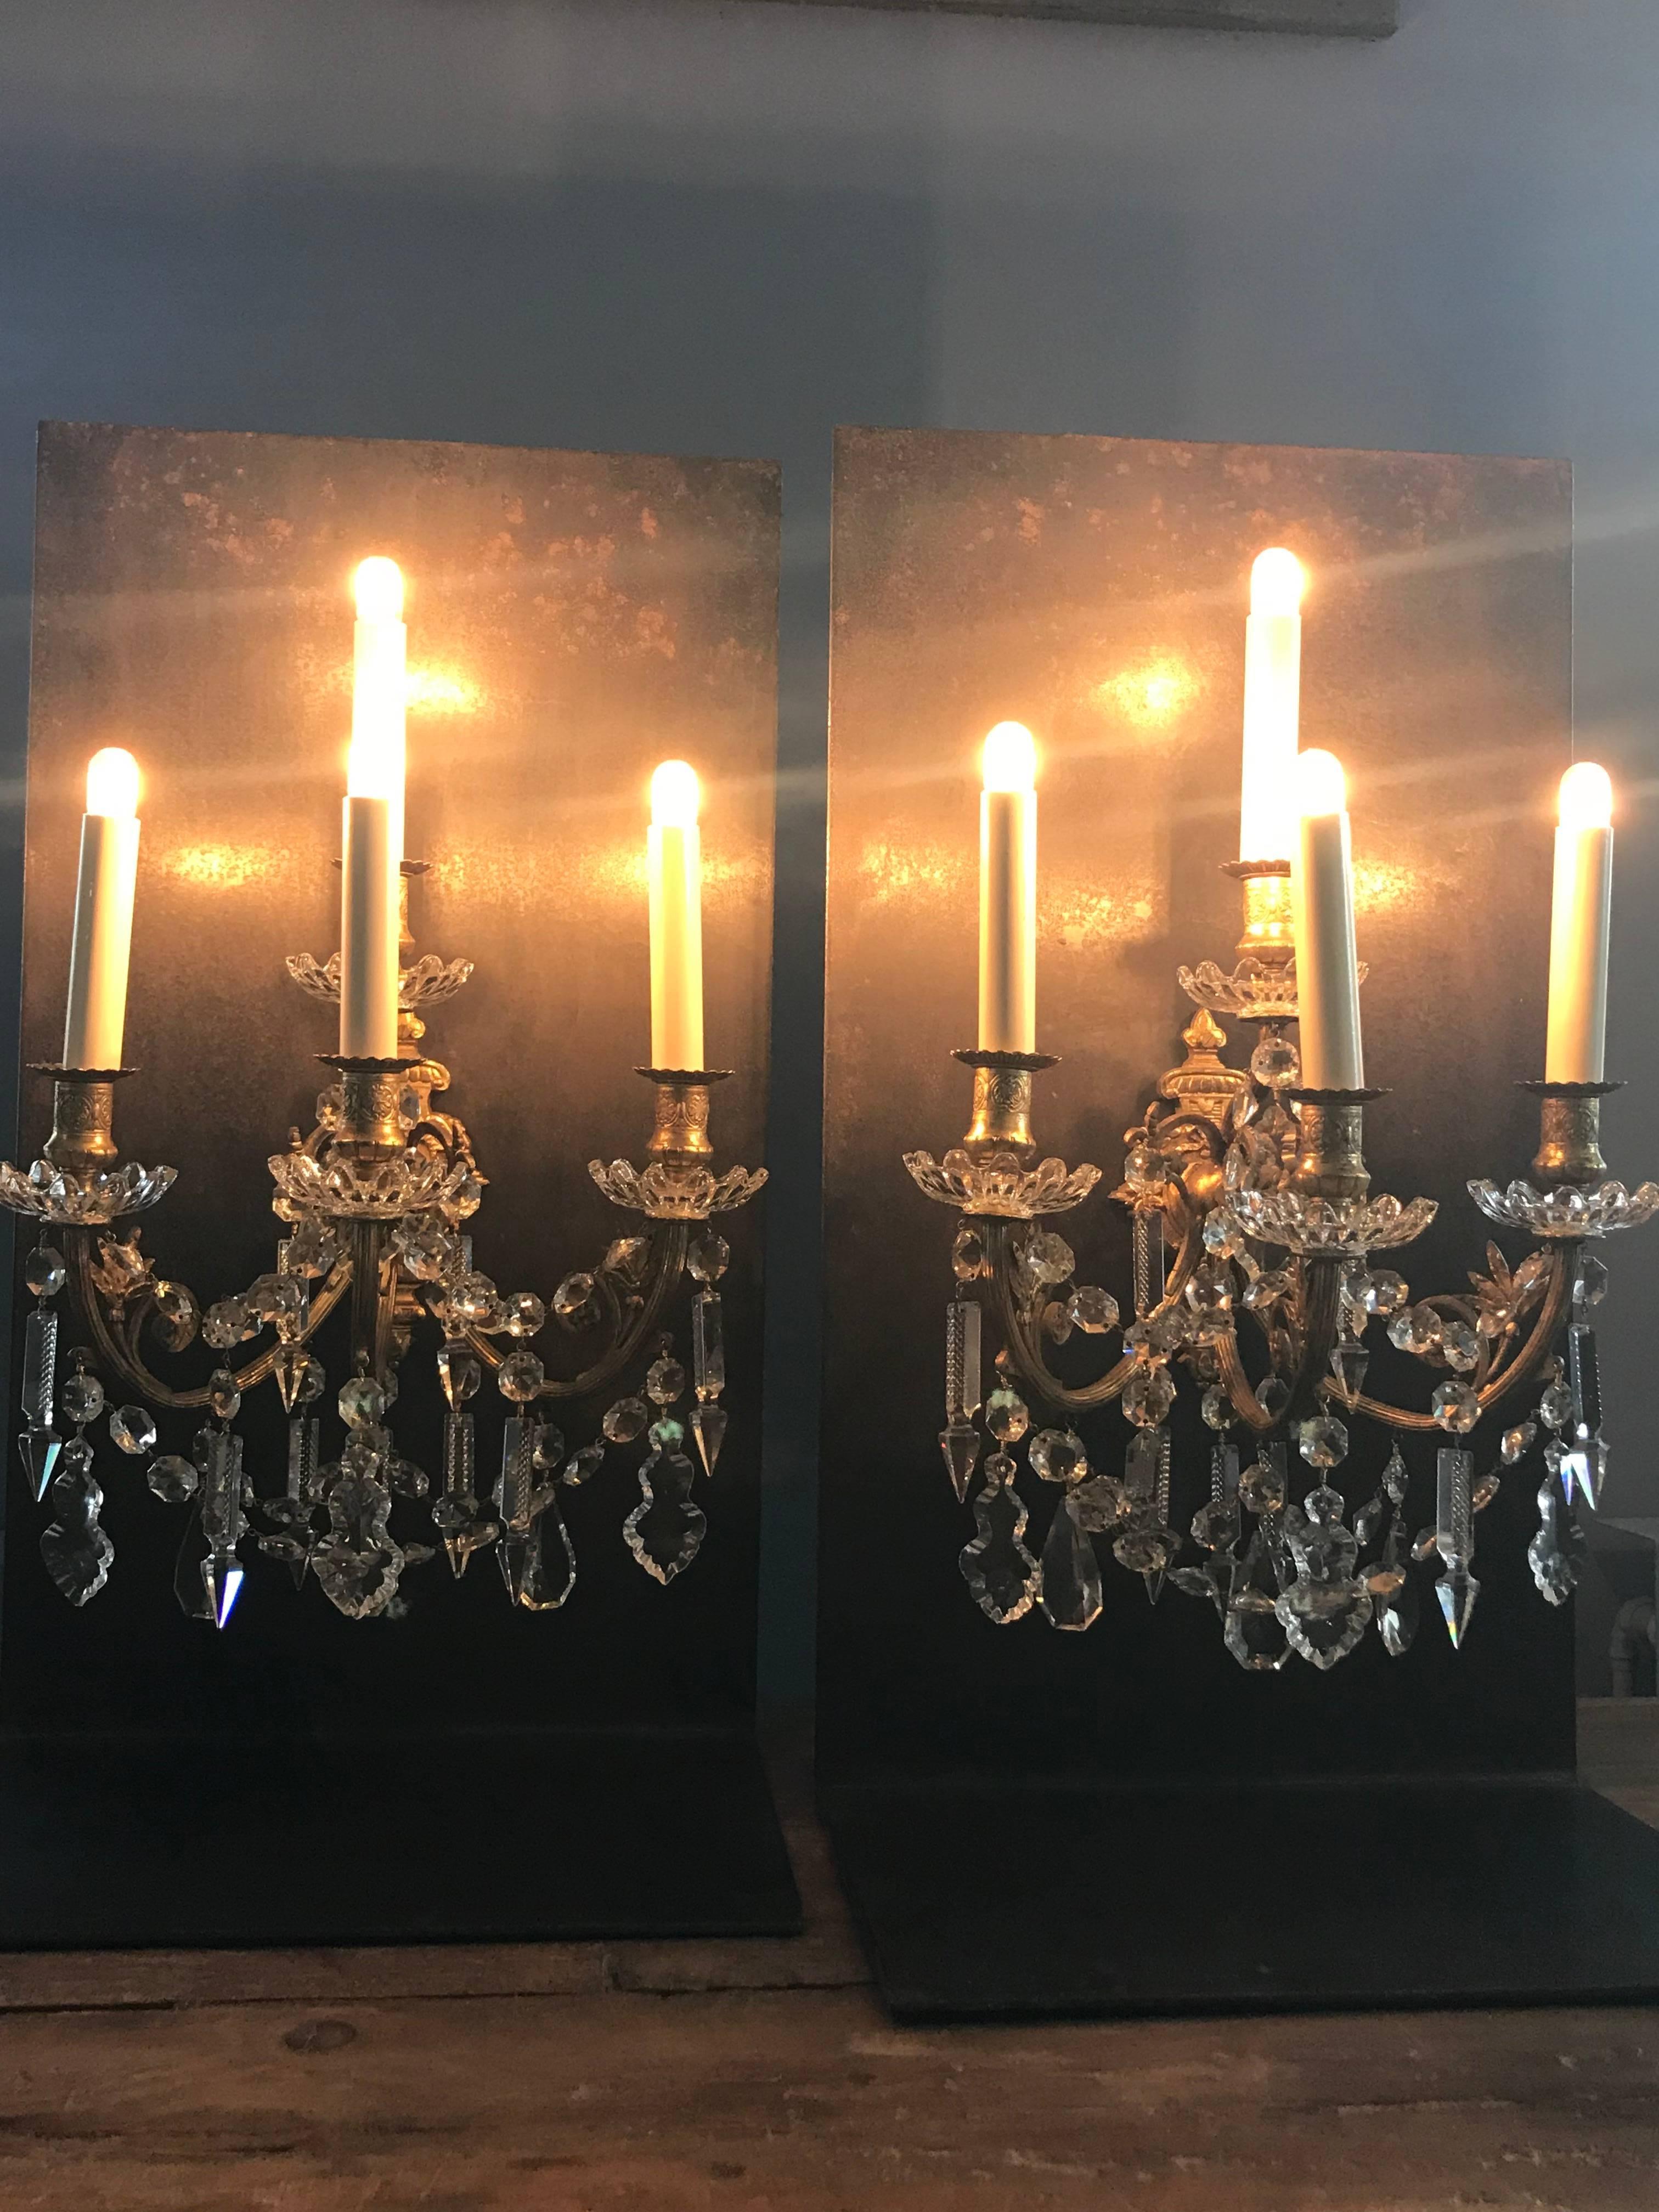 Pair of French Antique Girandoles Sconces In Excellent Condition For Sale In Schellebelle, BE